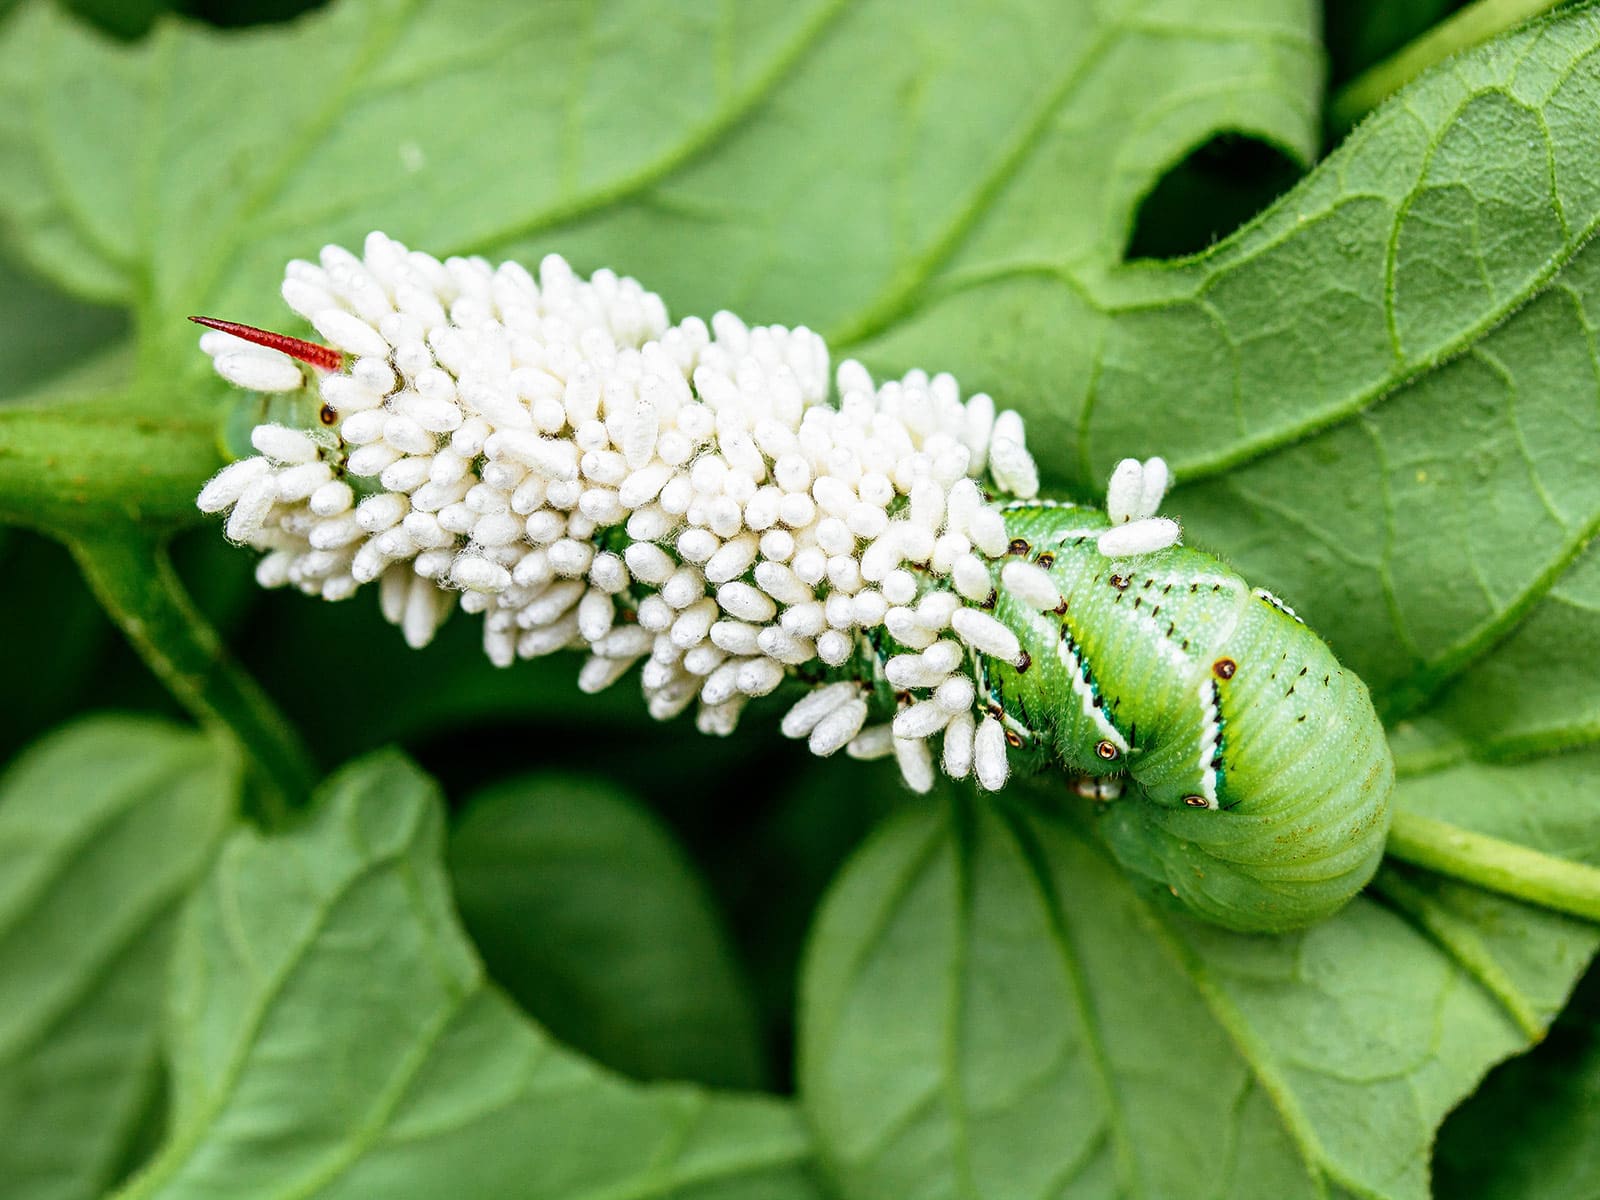 A tomato hornworm on a leaf, infested with a large amount of braconid wasp cocoons